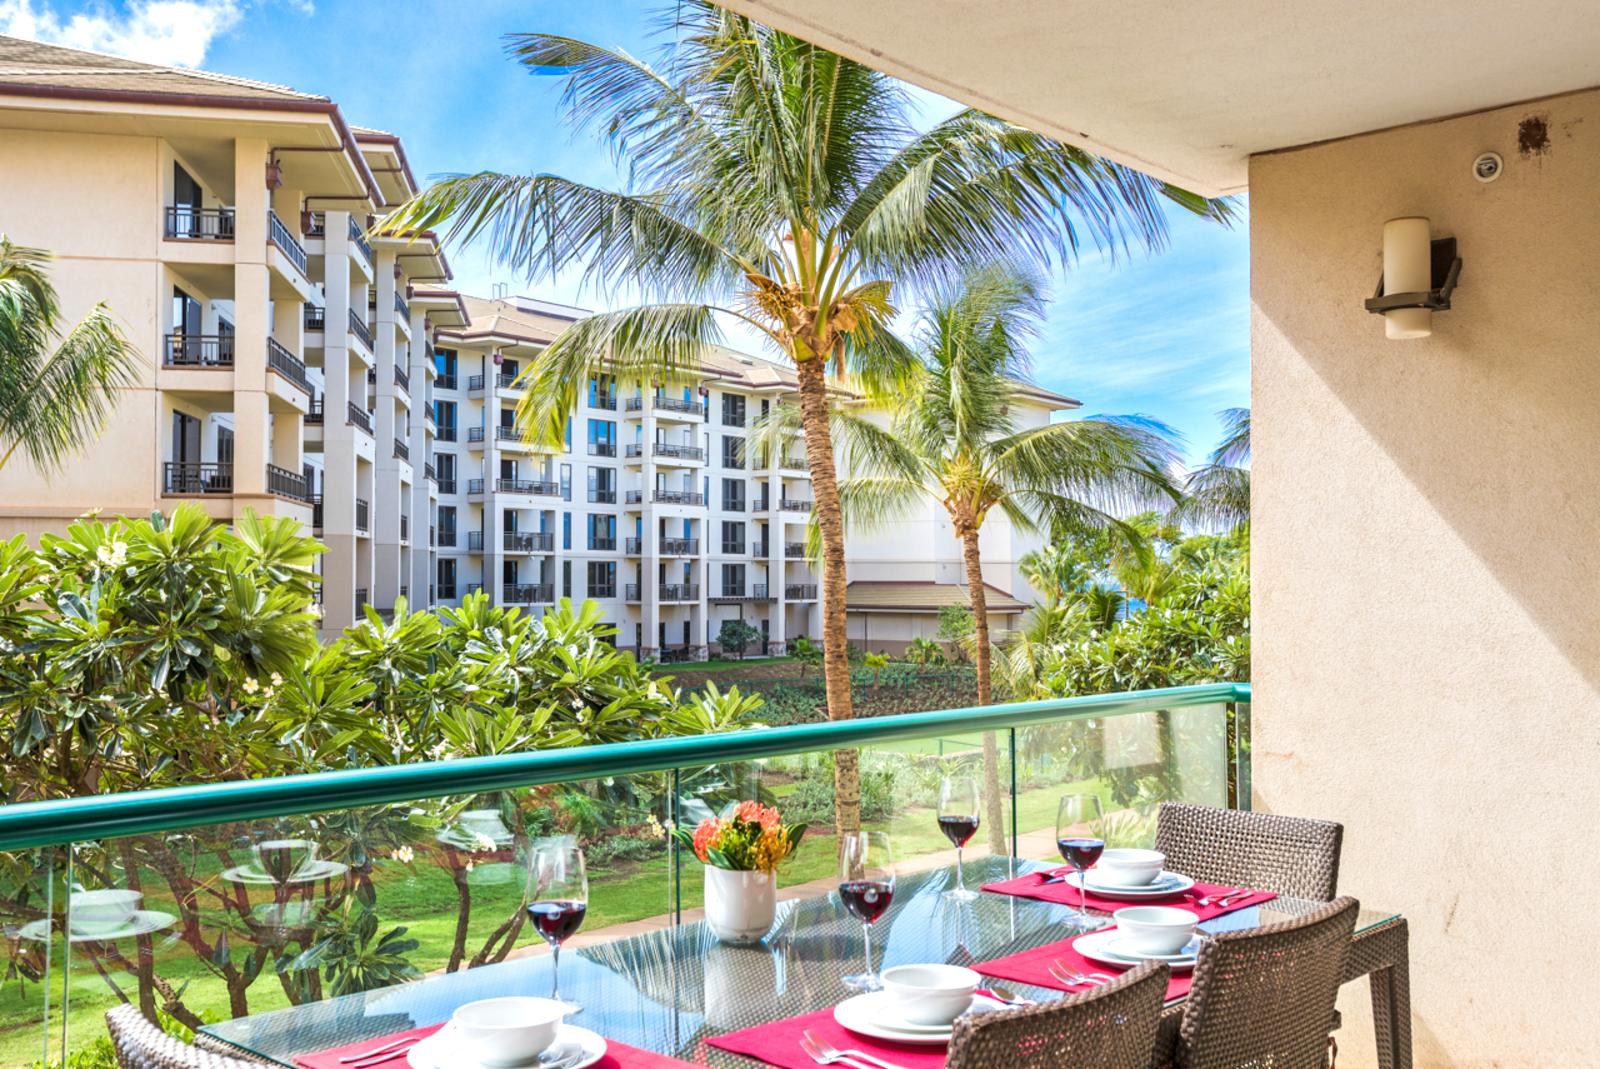 Beautiful tropic views, escape to this paradise